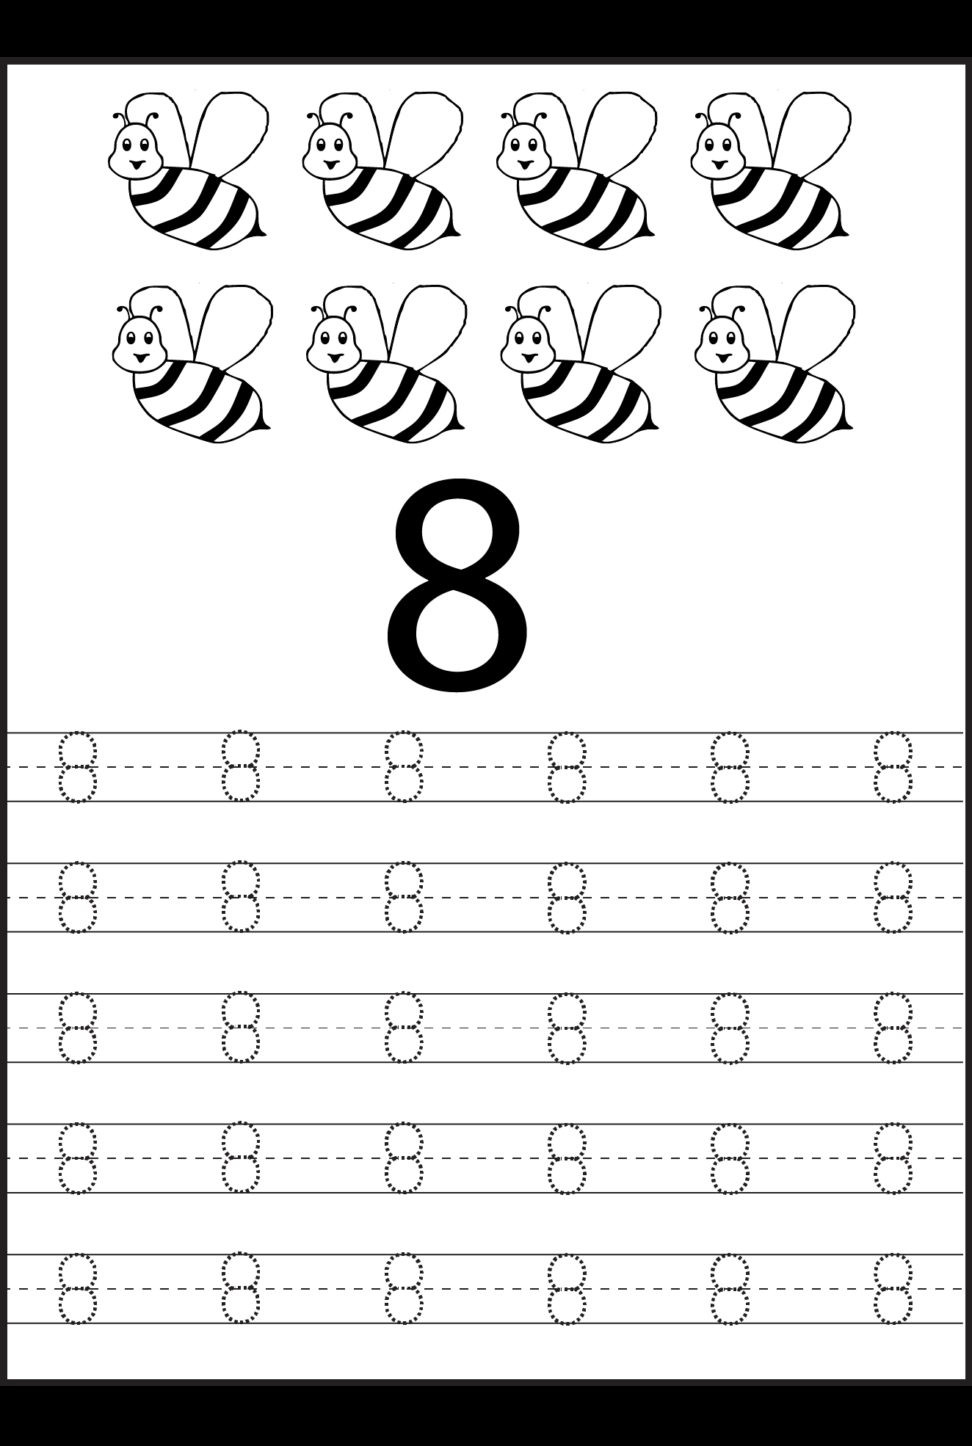 Toddler 0-5 Coloring Pages
 Identifying Numbers Worksheets Kindergarten